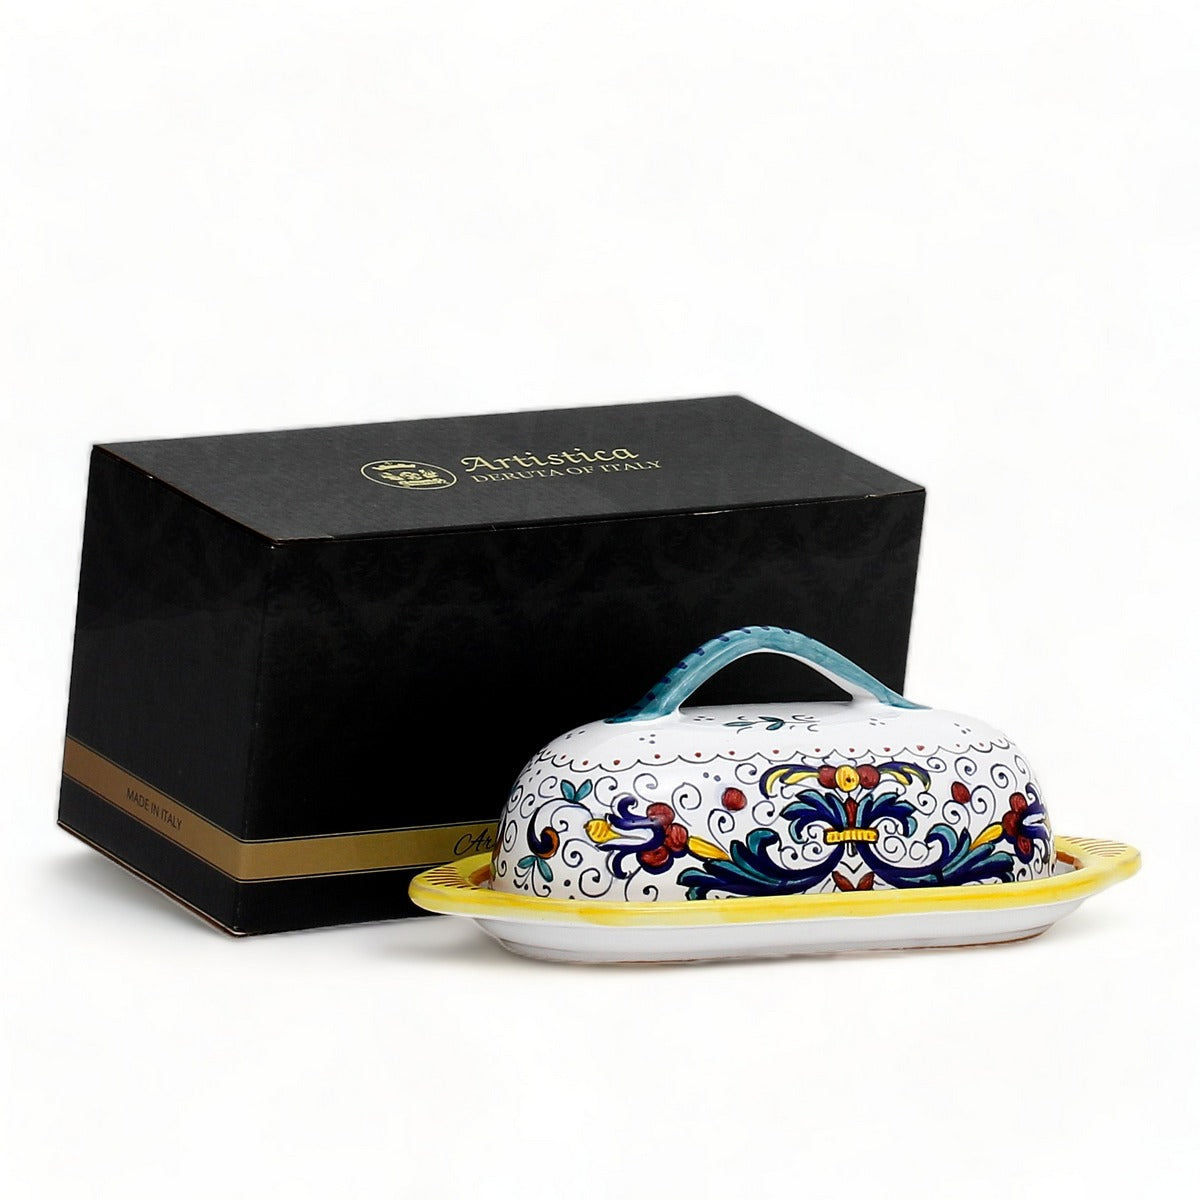 GIFT BOX: With authentic Deruta hand painted ceramic - Butter Dish with cover Ricco Deruta Design